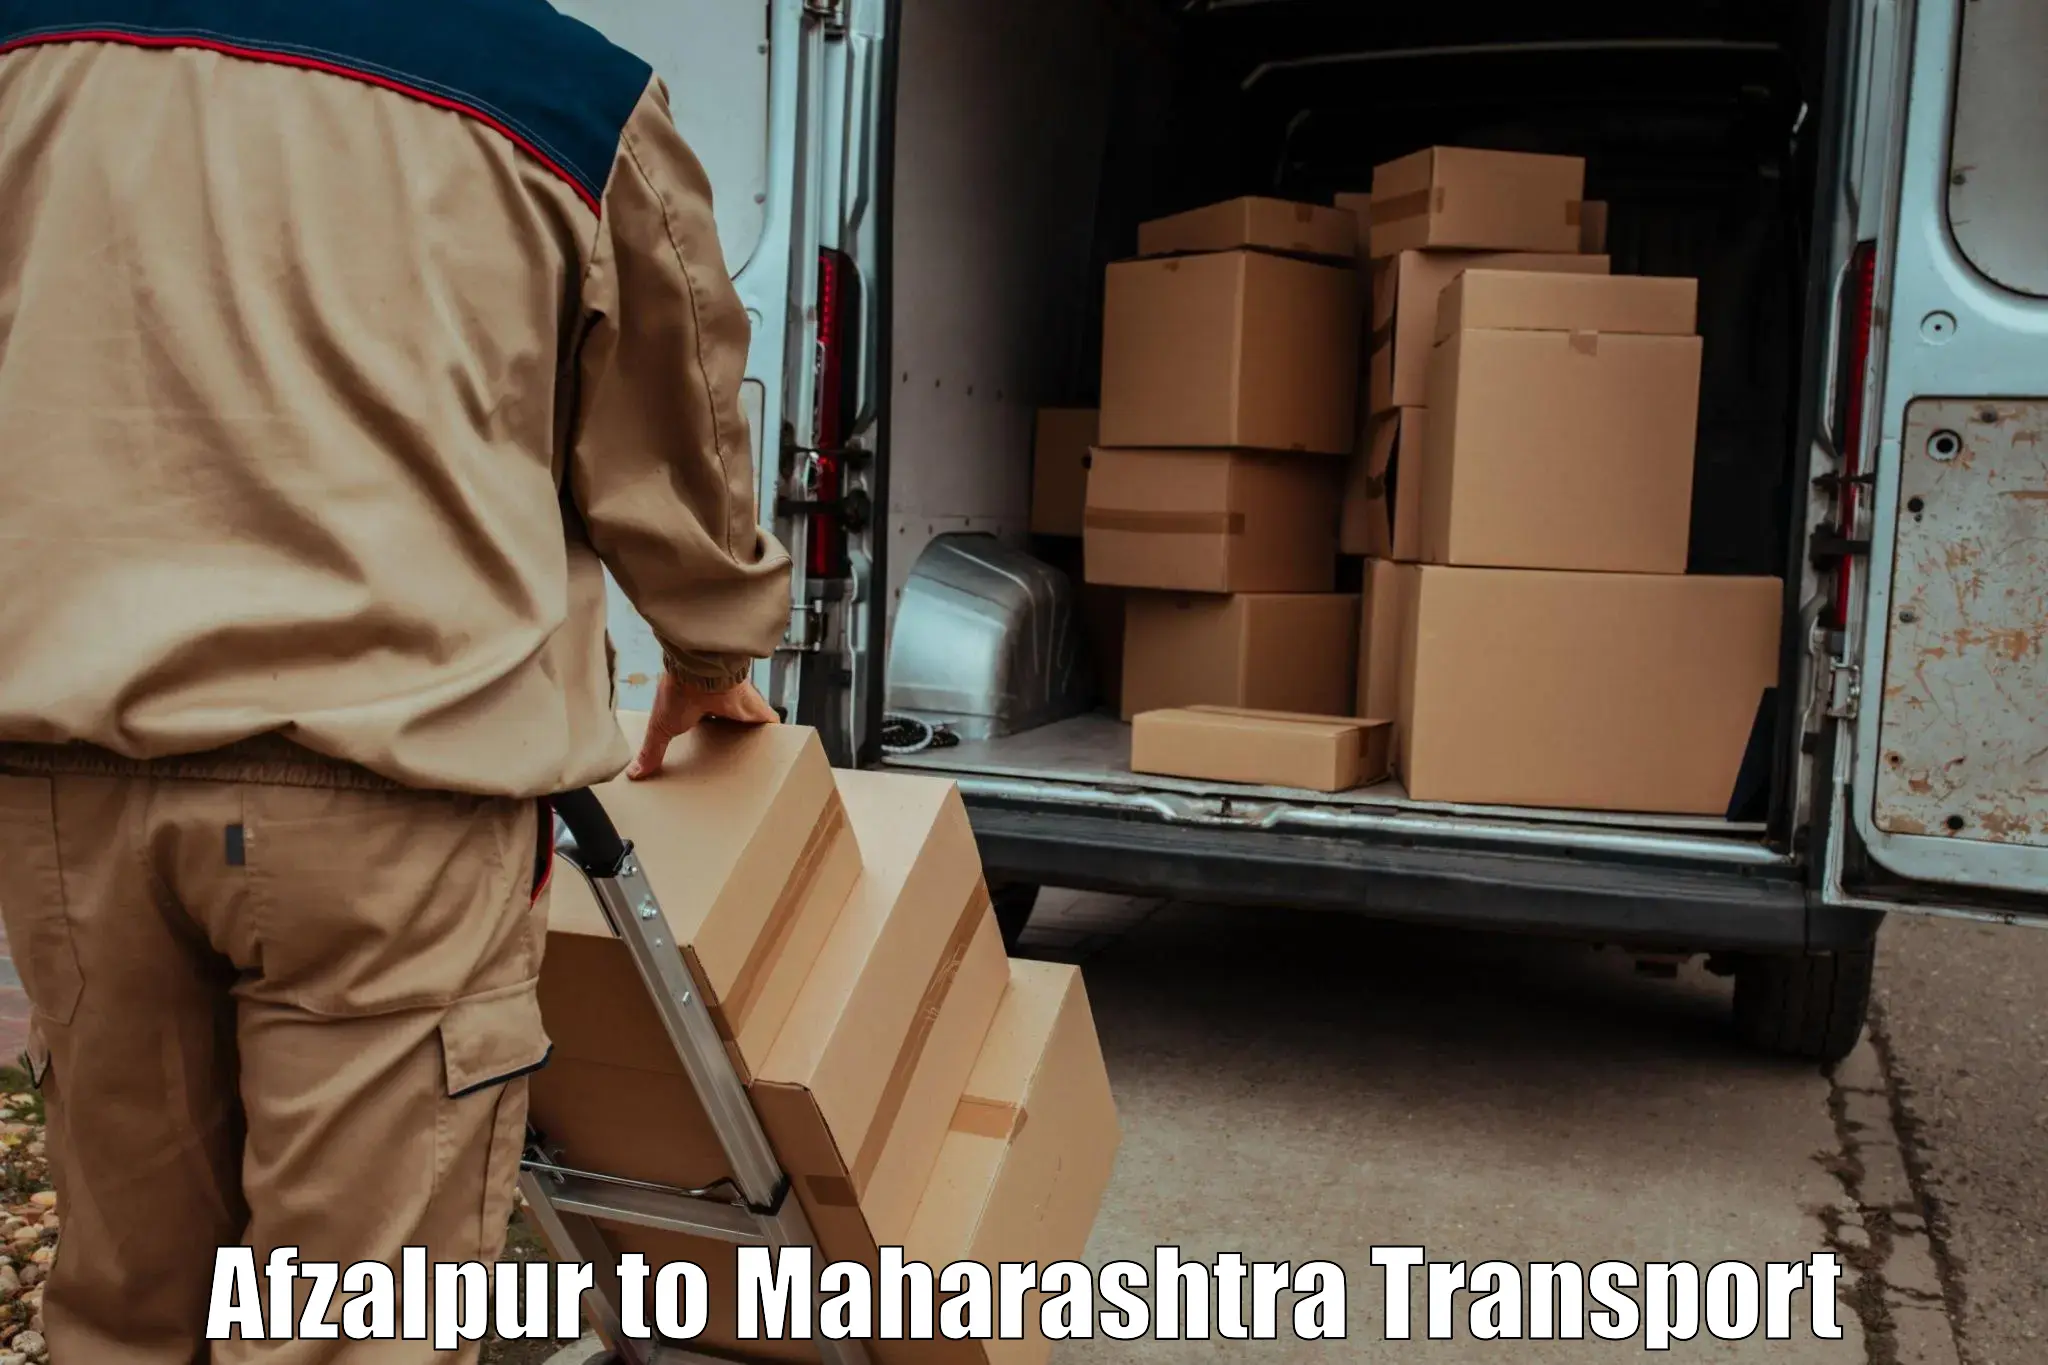 Truck transport companies in India Afzalpur to Chalisgaon